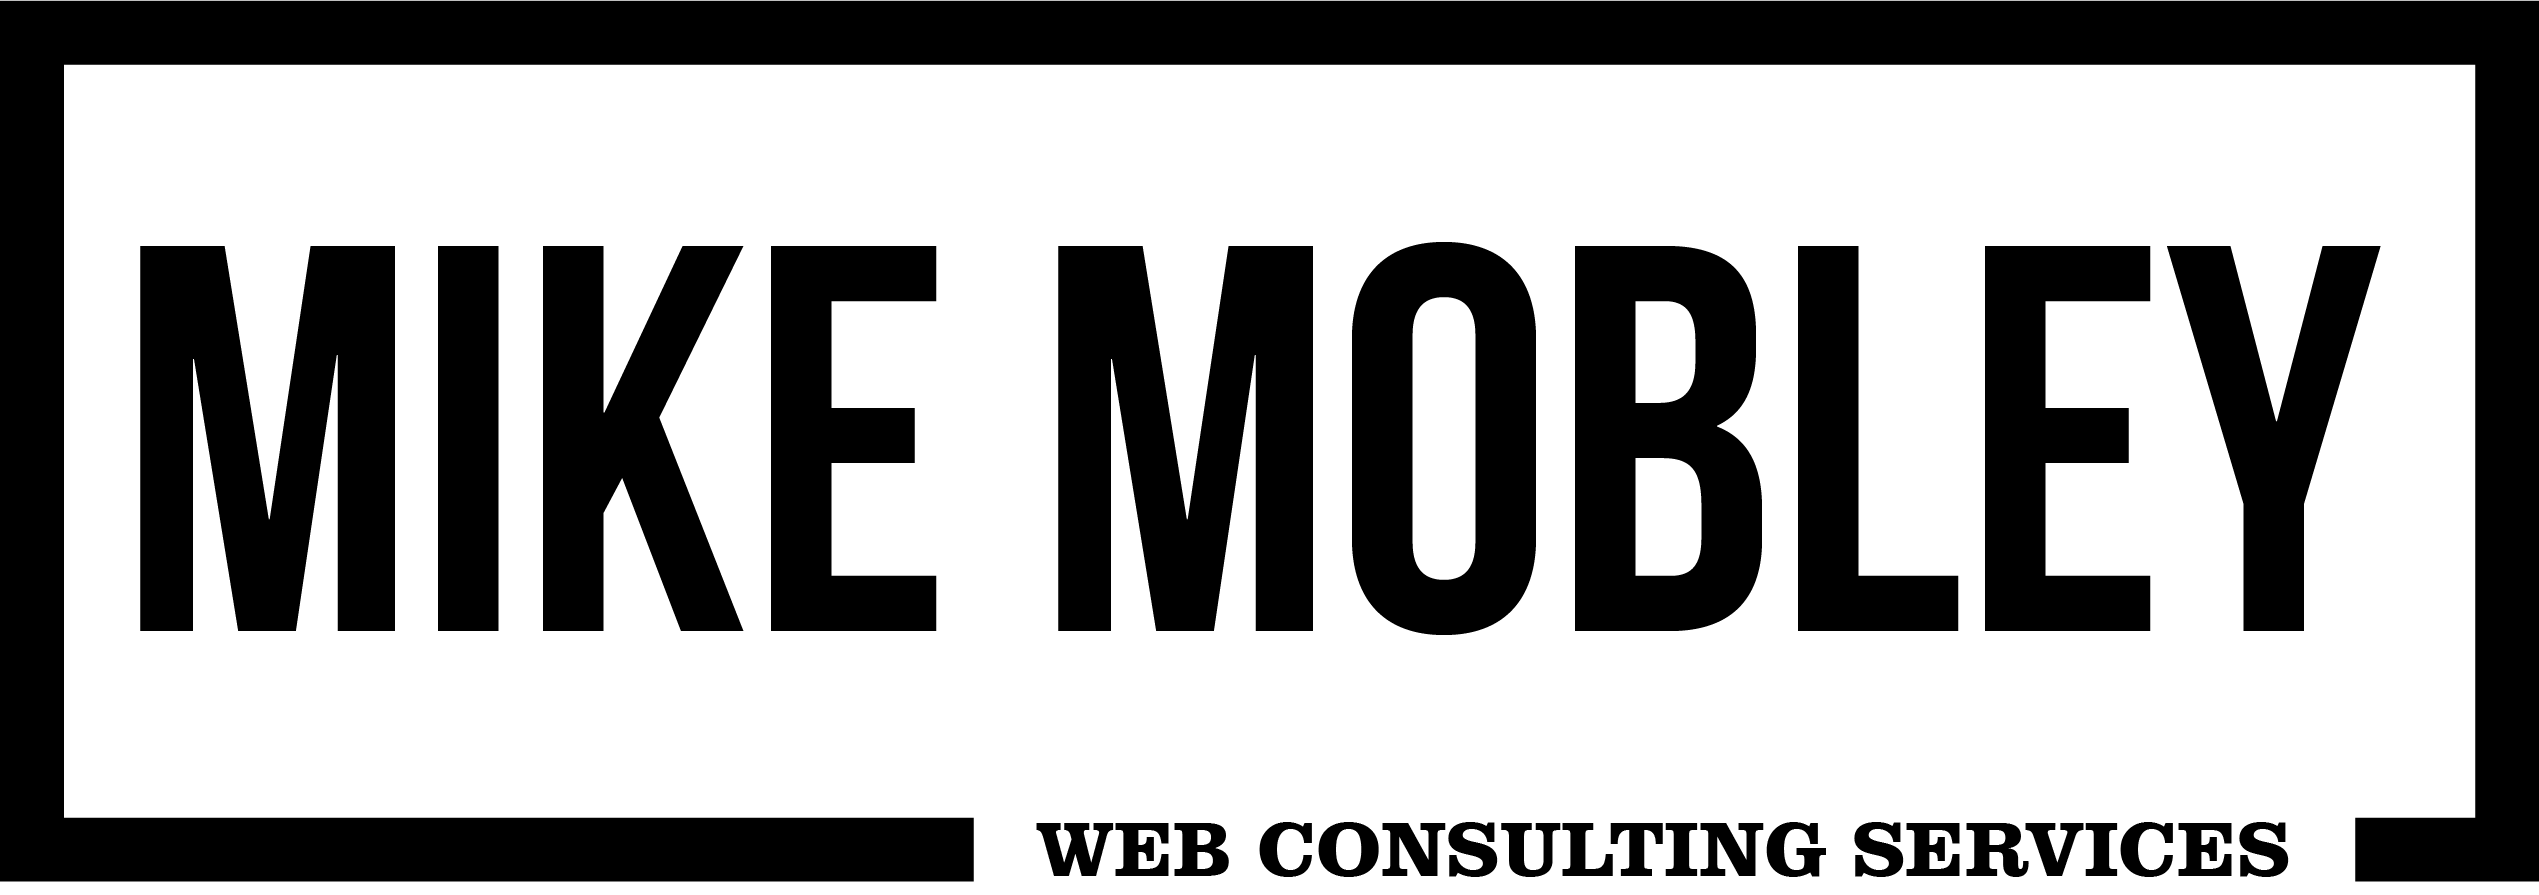 Mobley Logo - Mike Mobley Web Consulting Services